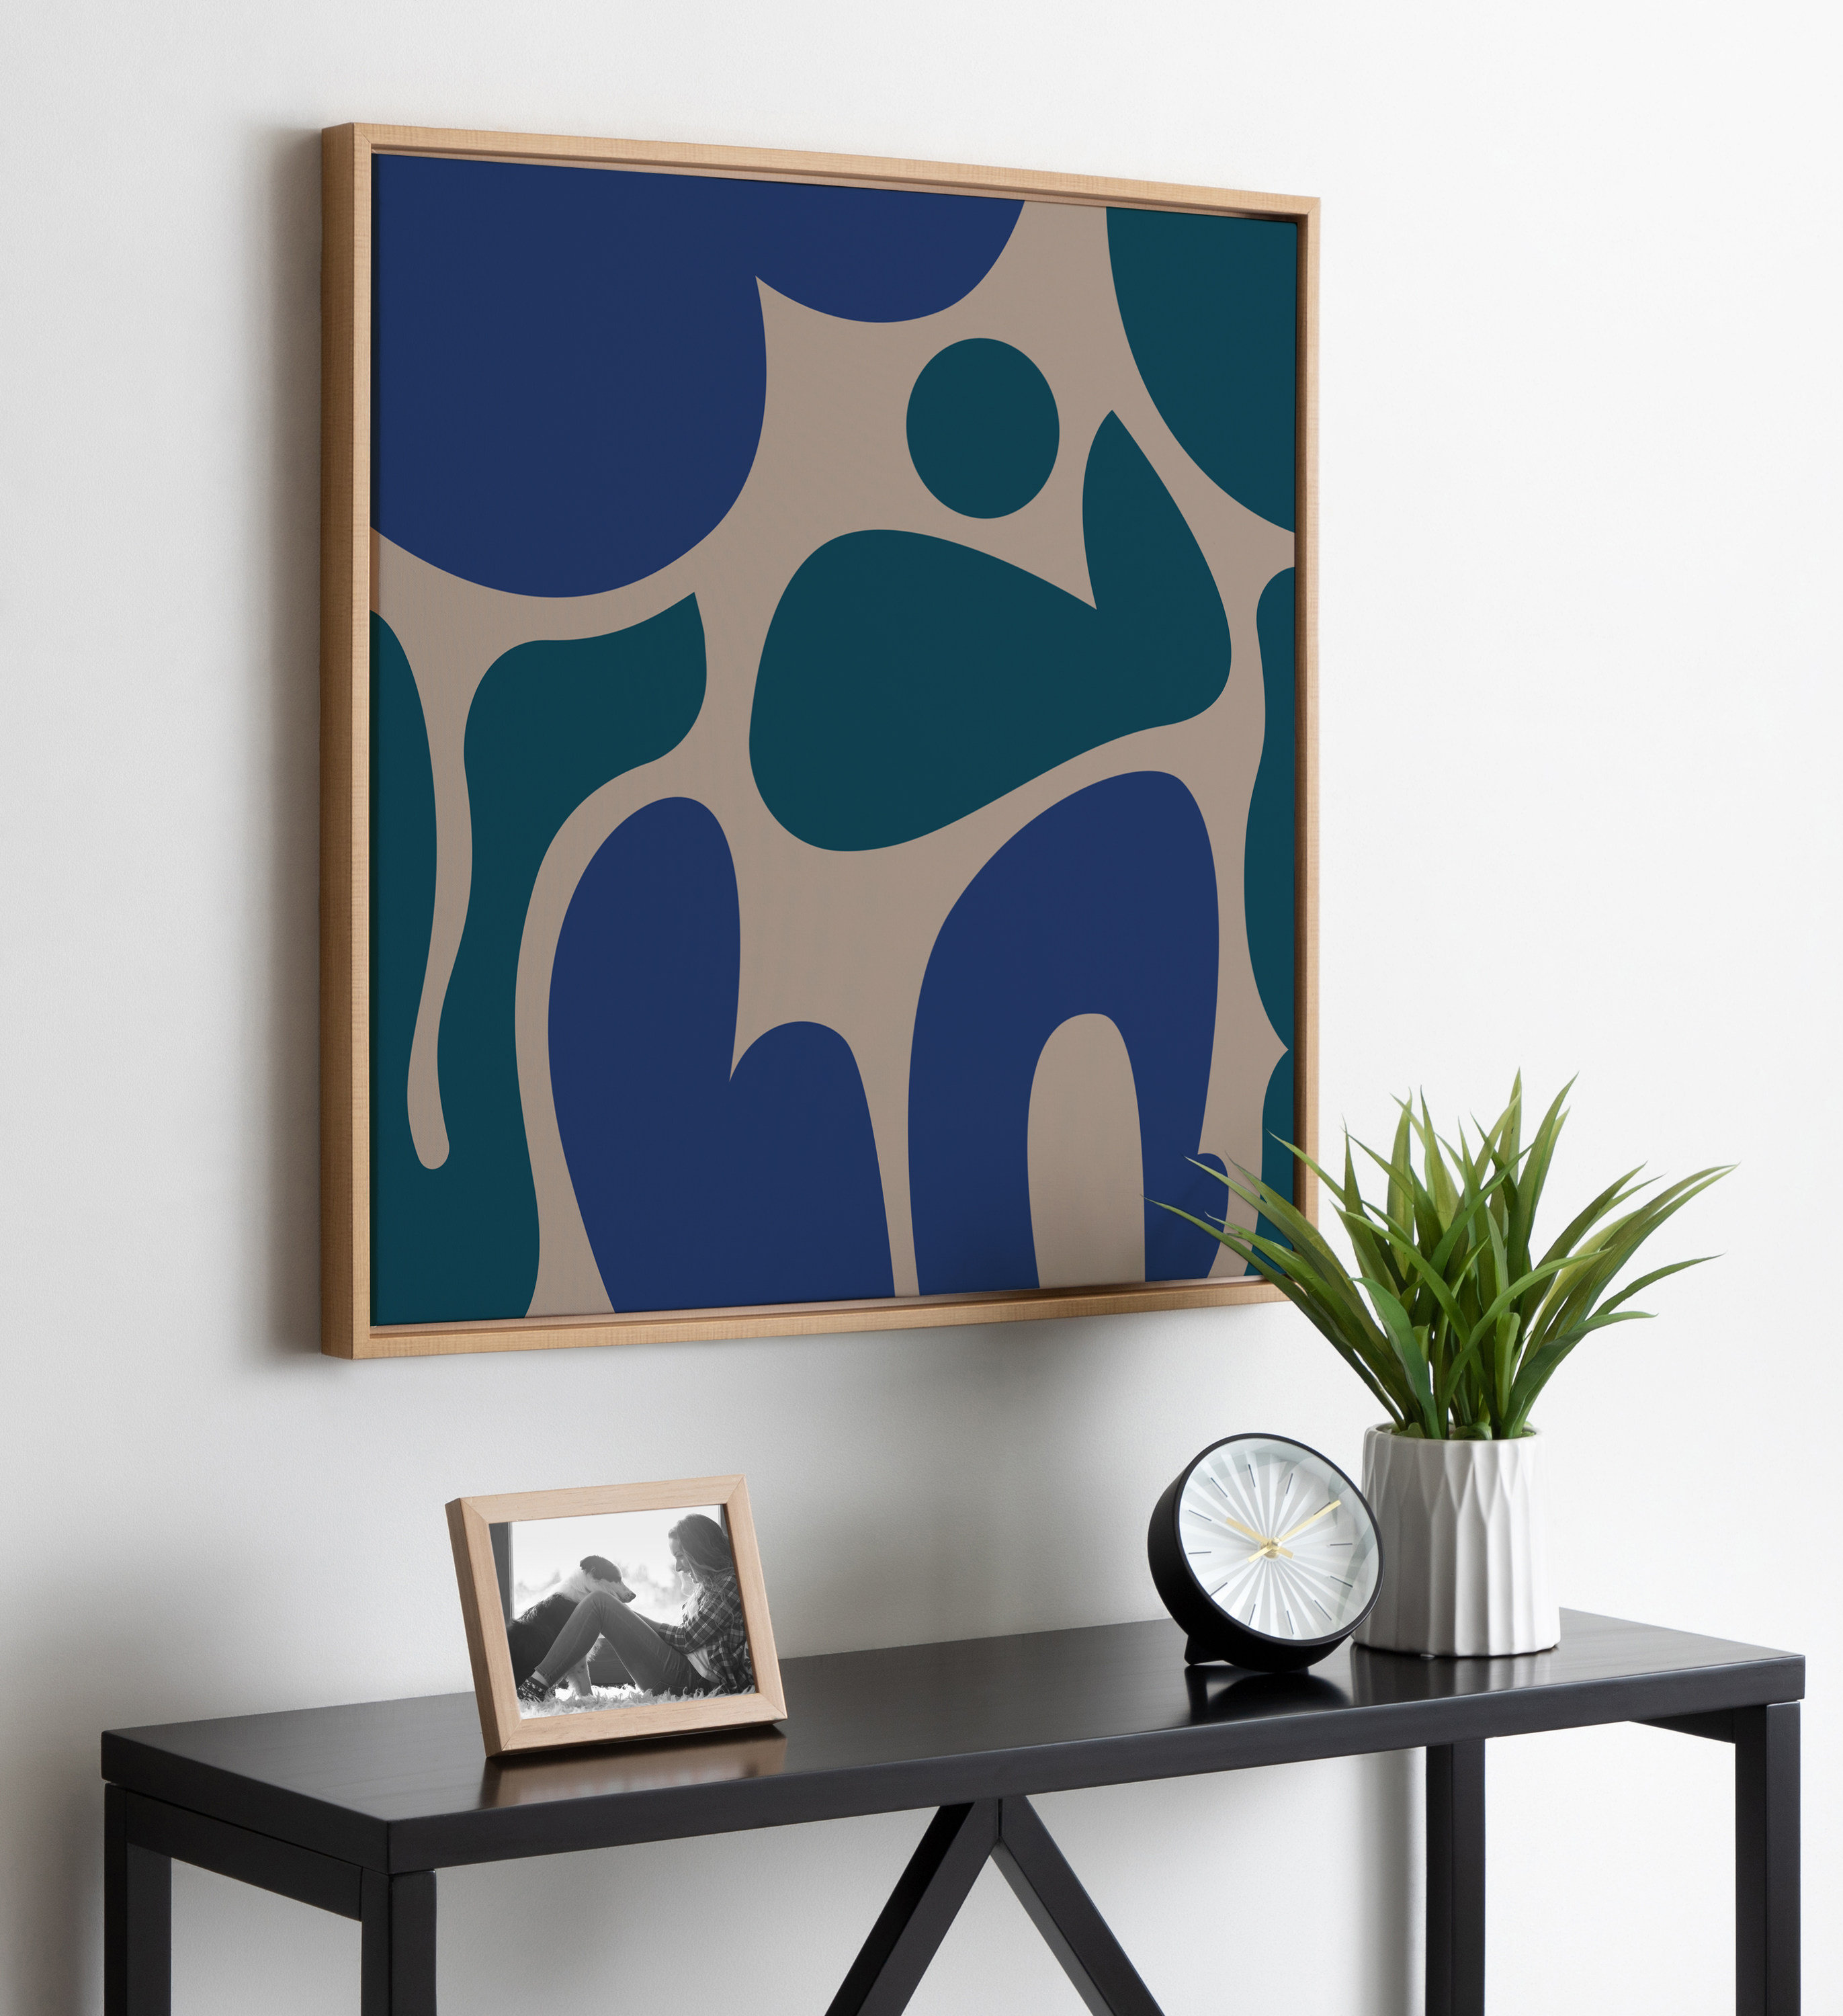 Ontrouw Interpreteren Scepticisme Ivy Bronx Groovy Happy Abstract Blue And Green 30X30 A FC by The Creative  Bunch Studio - Floater Frame Print on Canvas | Wayfair